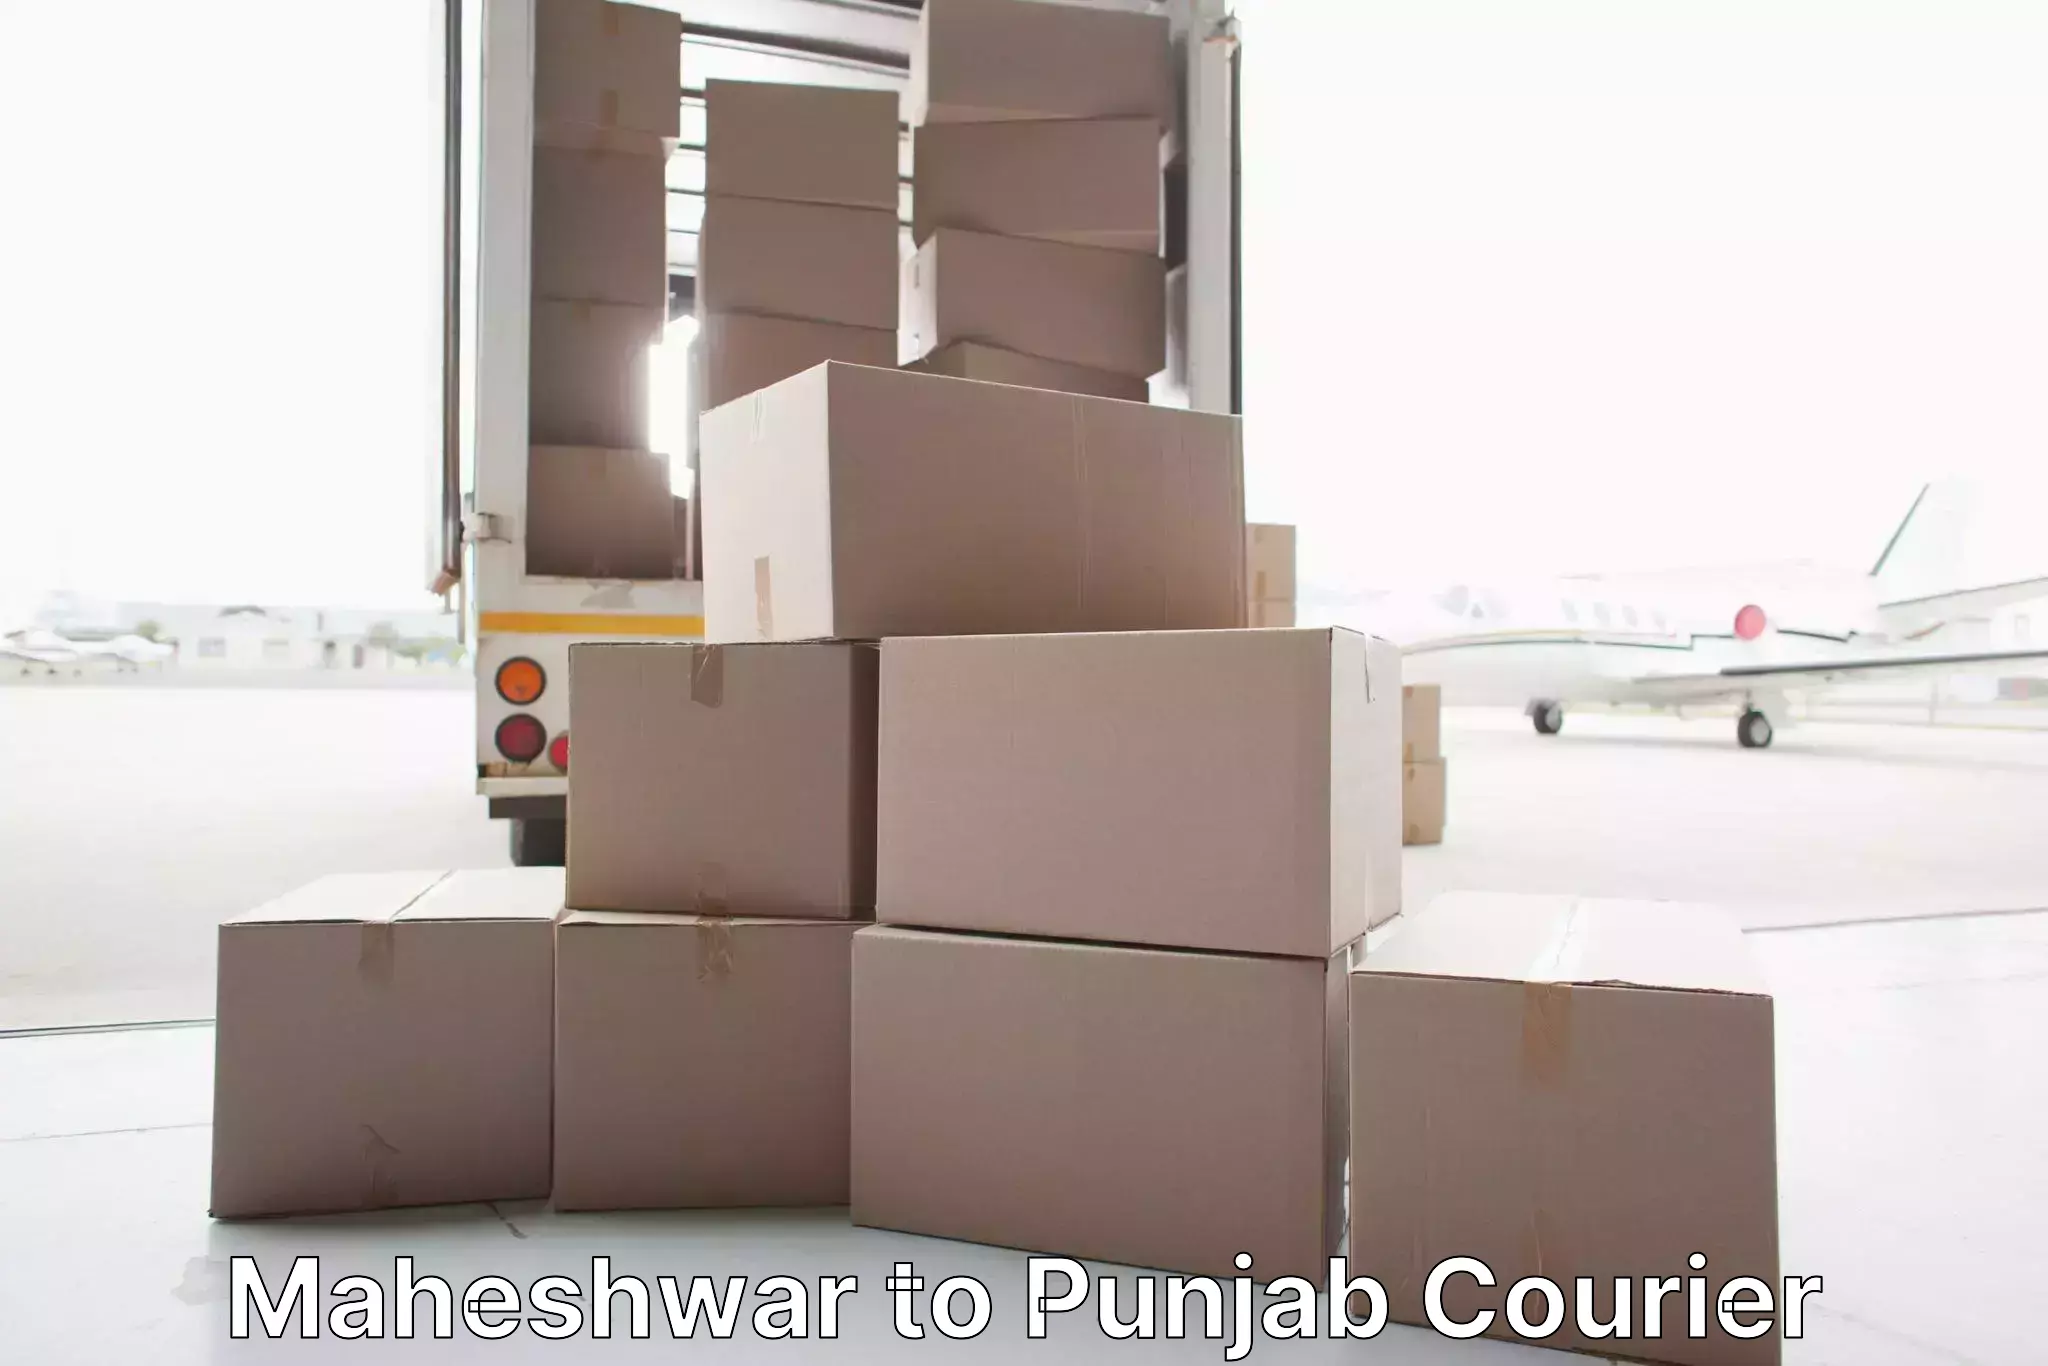 Full-service movers in Maheshwar to Punjab